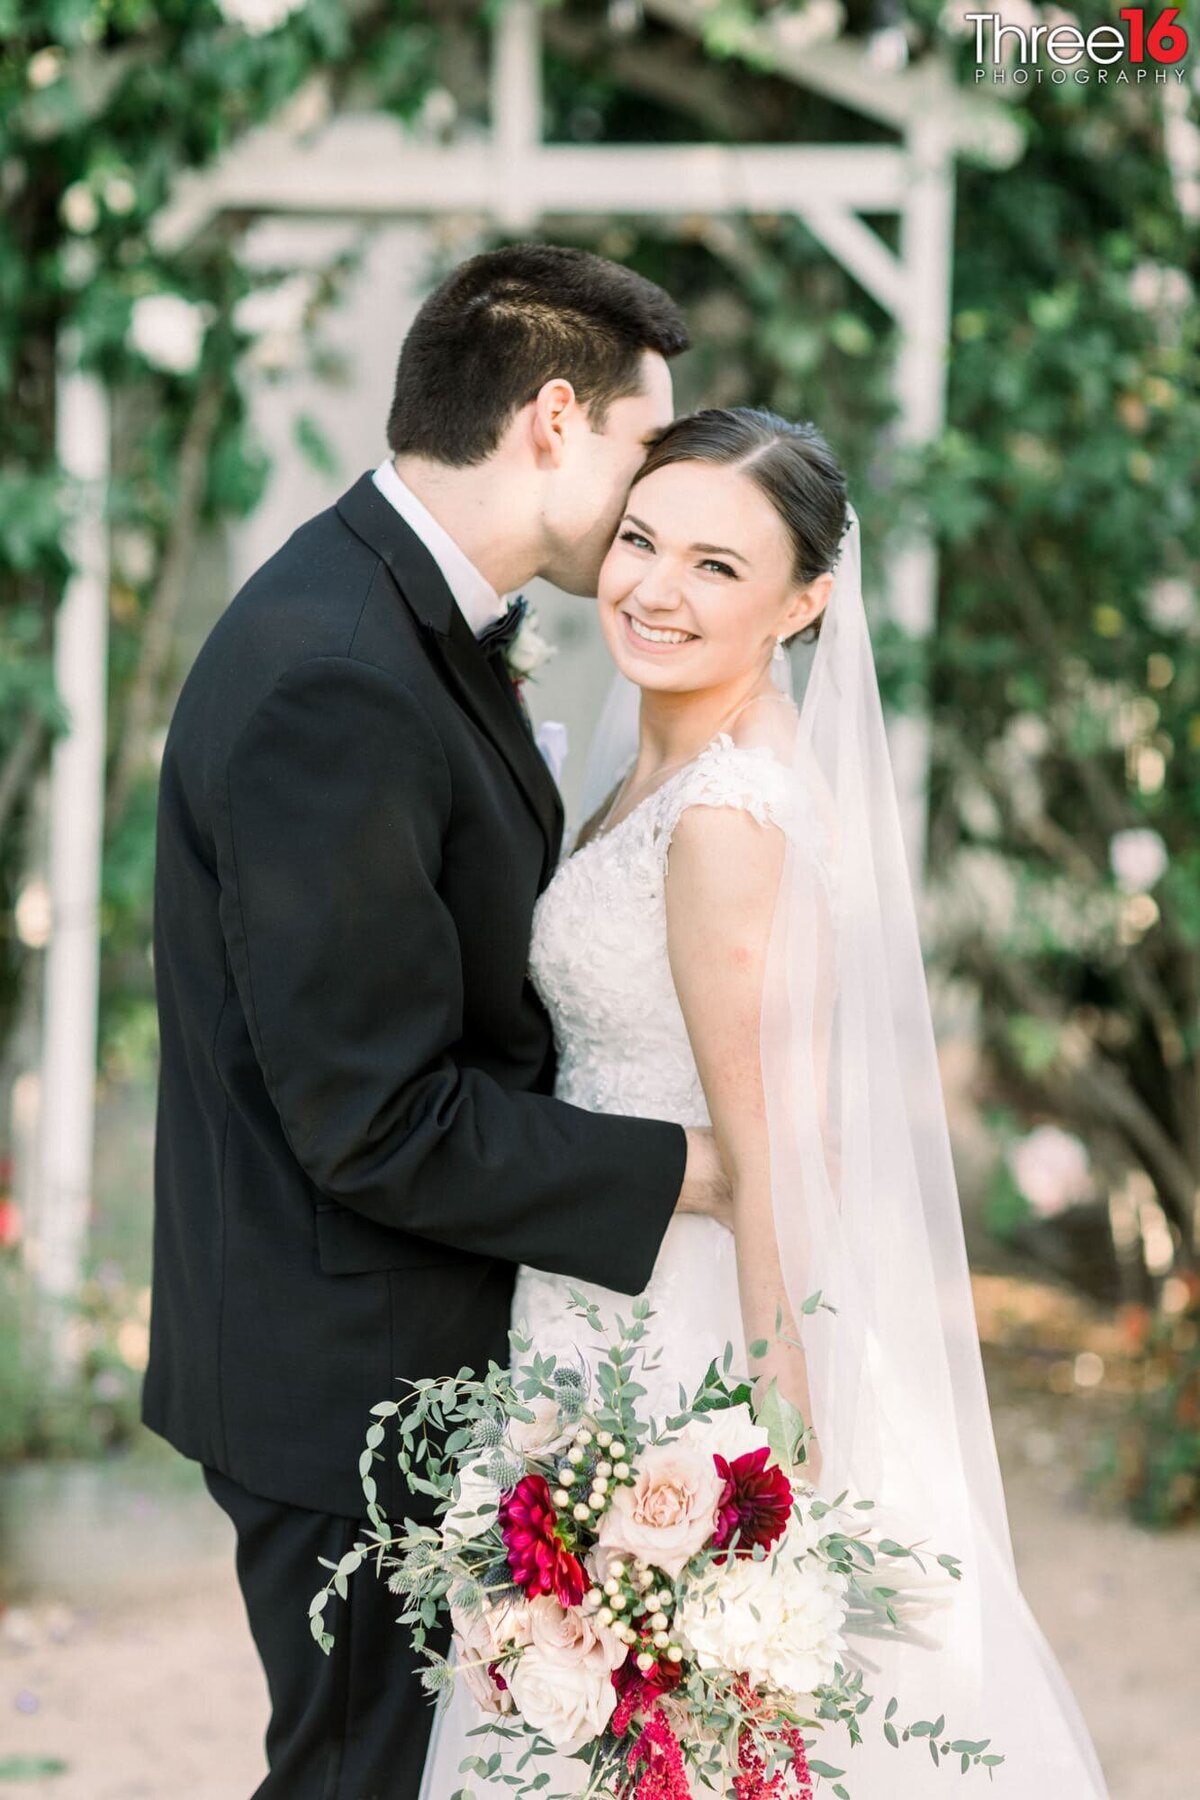 Groom whispers into his Bride's ear giving her a large smile